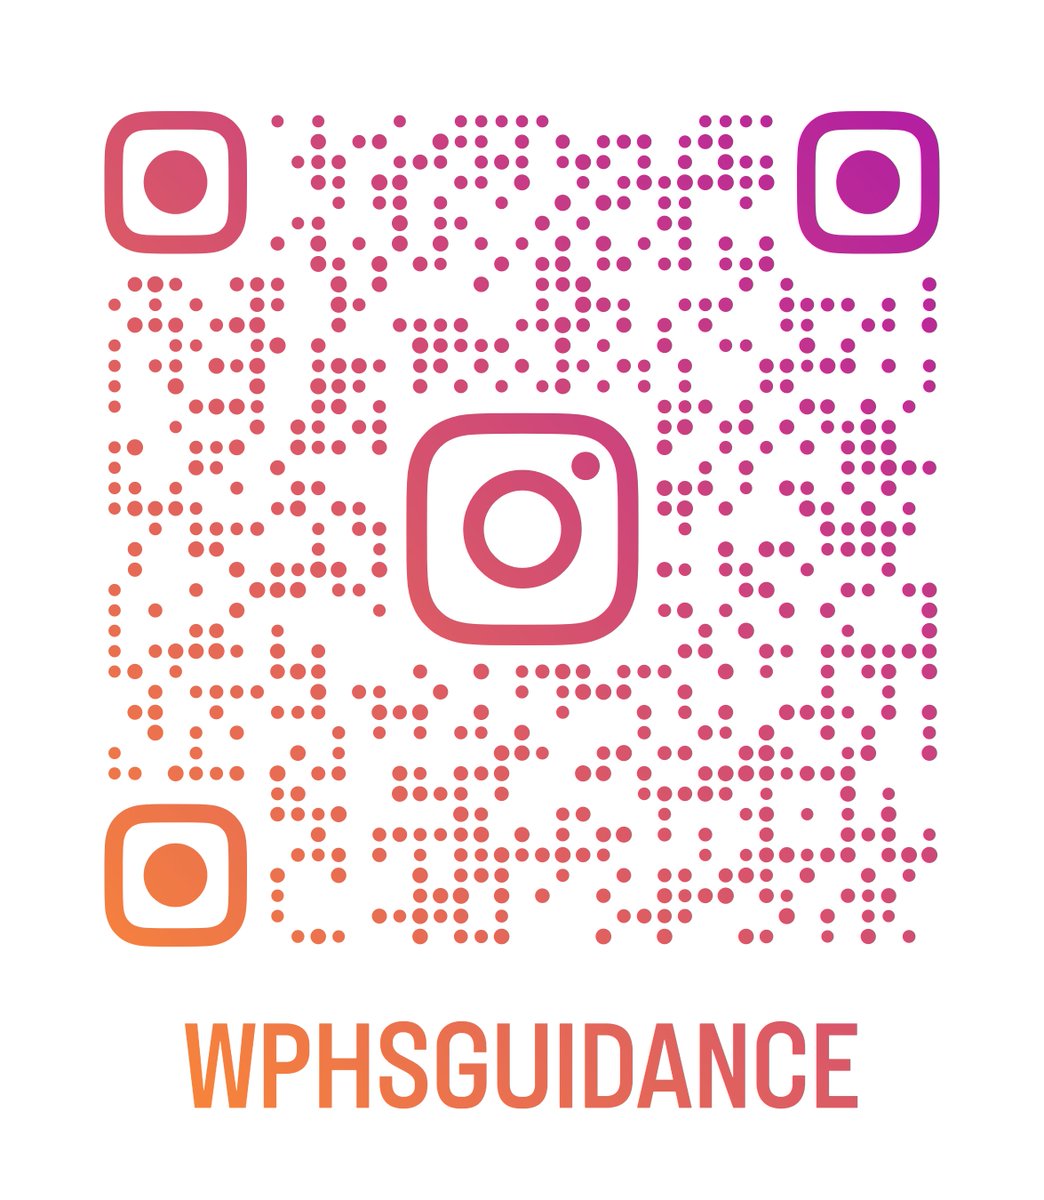 Follow WPHS Guidance Instagram page! Important information regarding community events, the college application process and school activities will be posted!